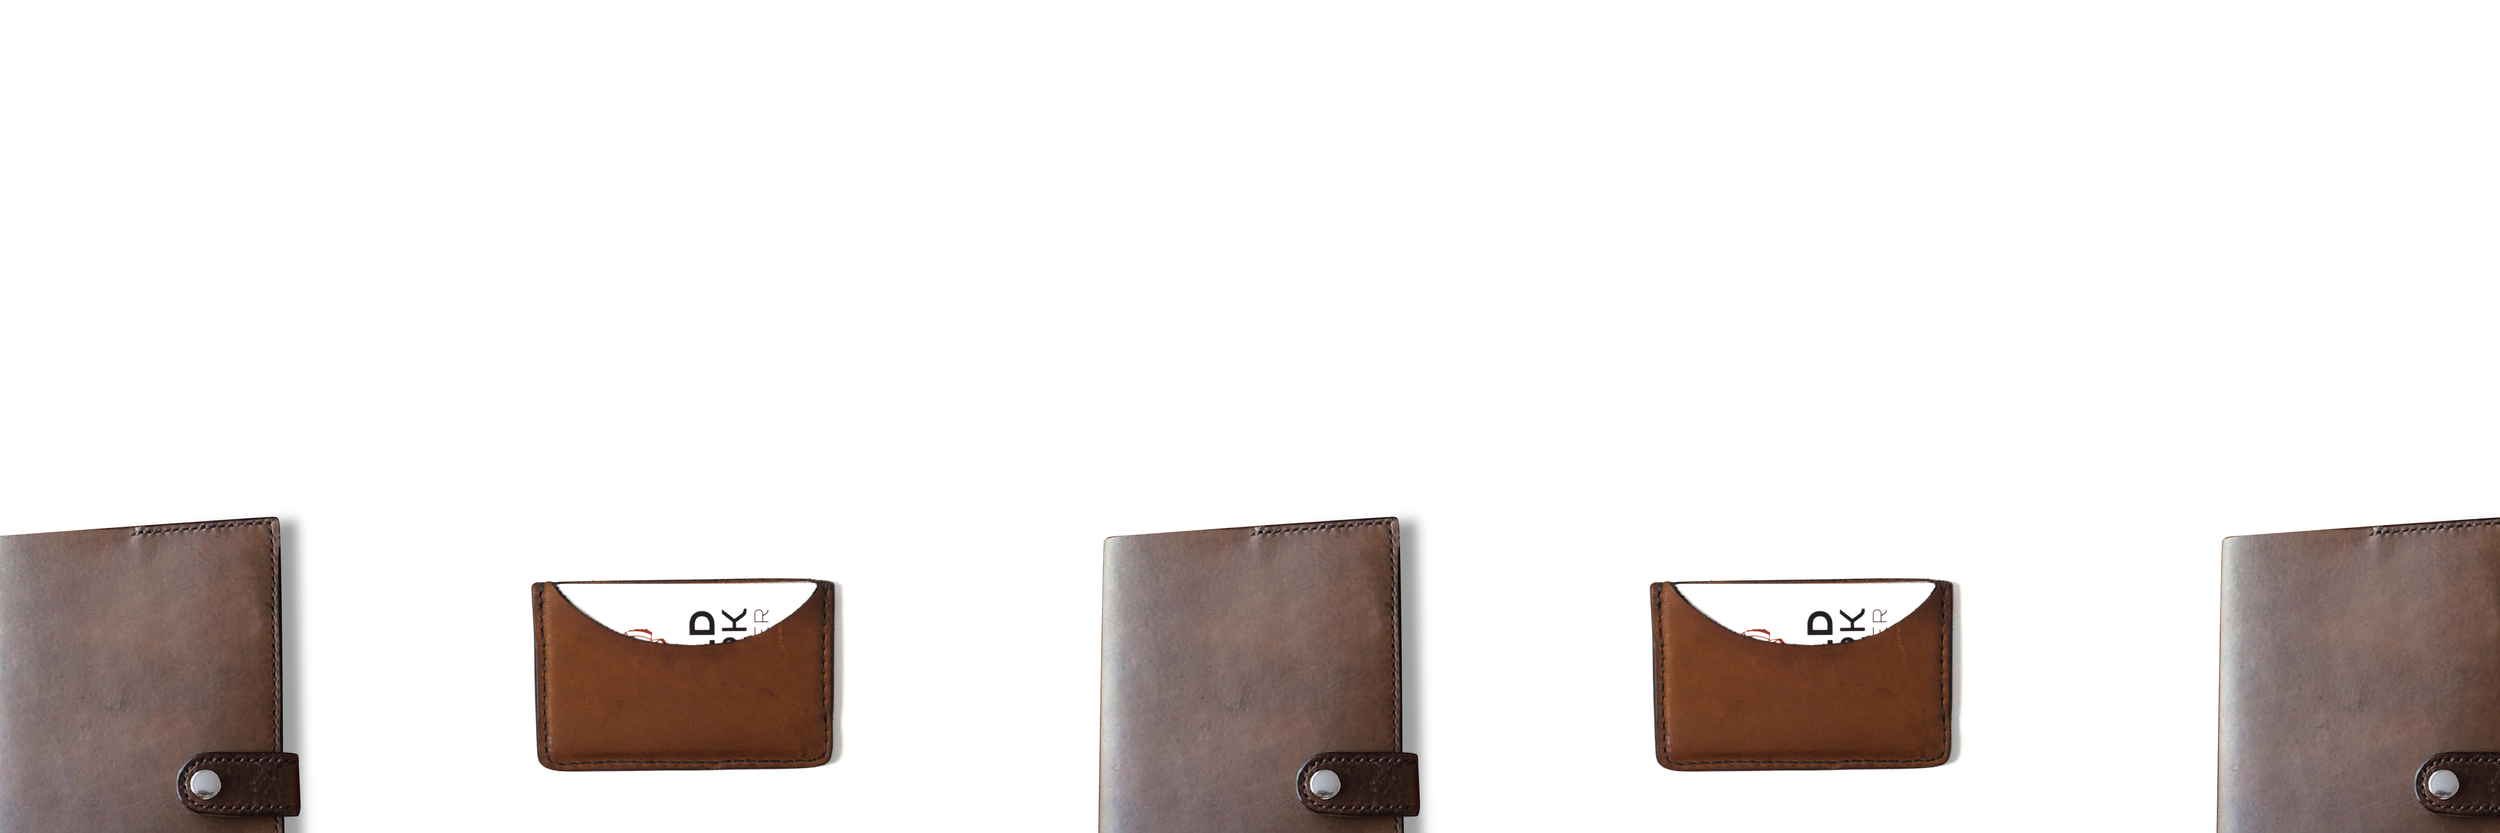 Decent quality starter leather working kit? : r/Leatherworking